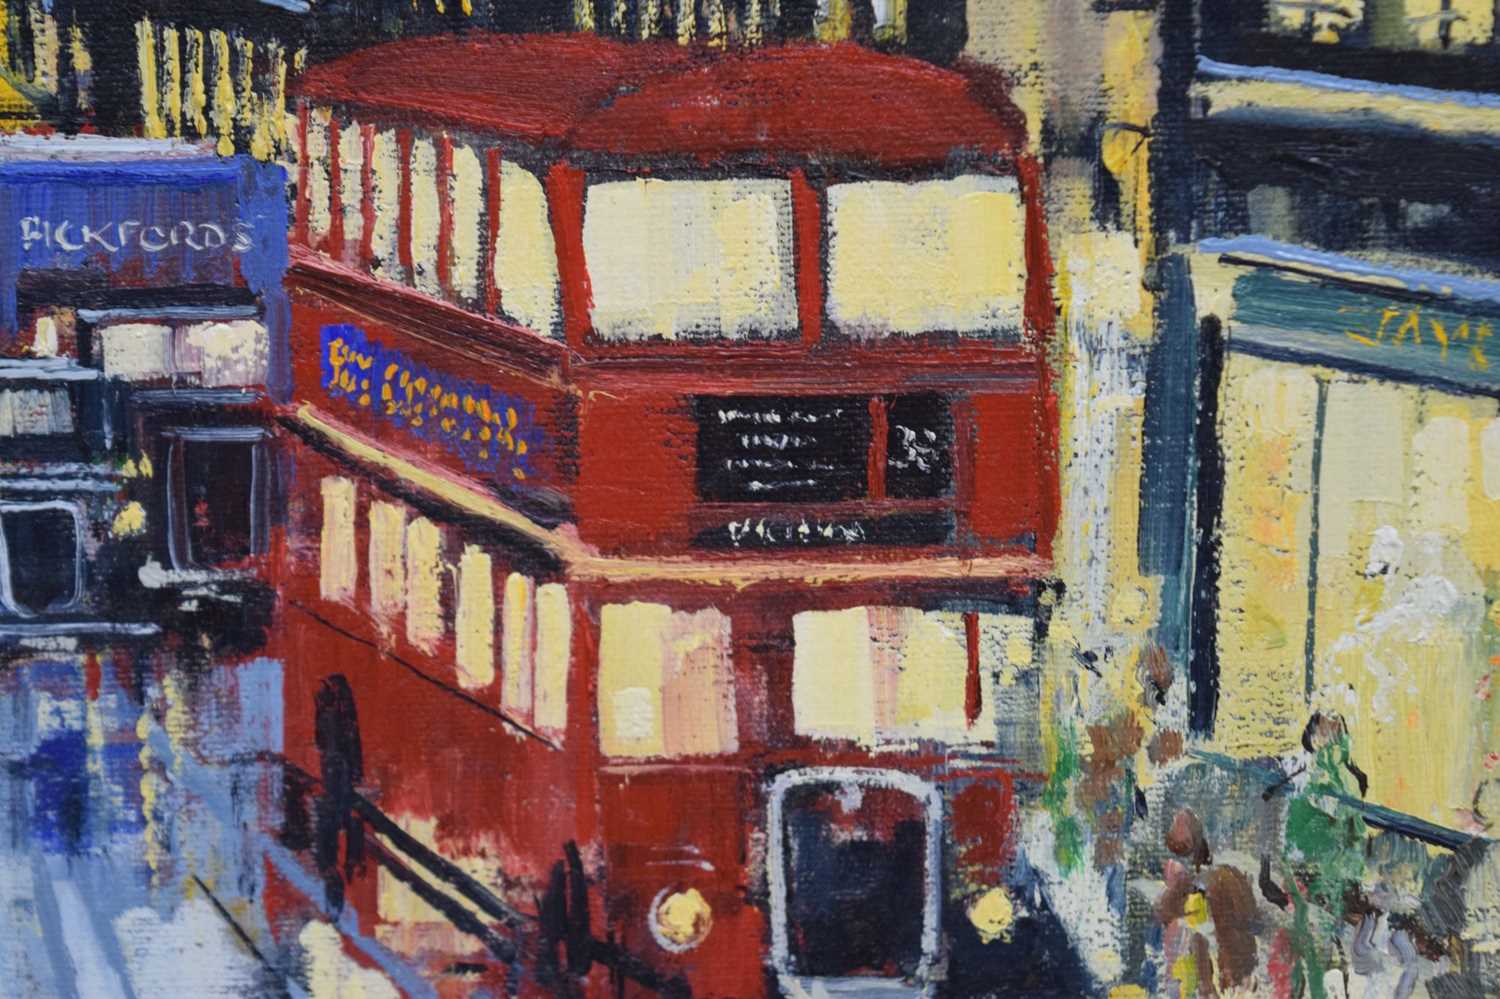 Alan King (1946-2013) - Oil on canvas - 'London Impressions', towards St. Pauls - Image 4 of 9